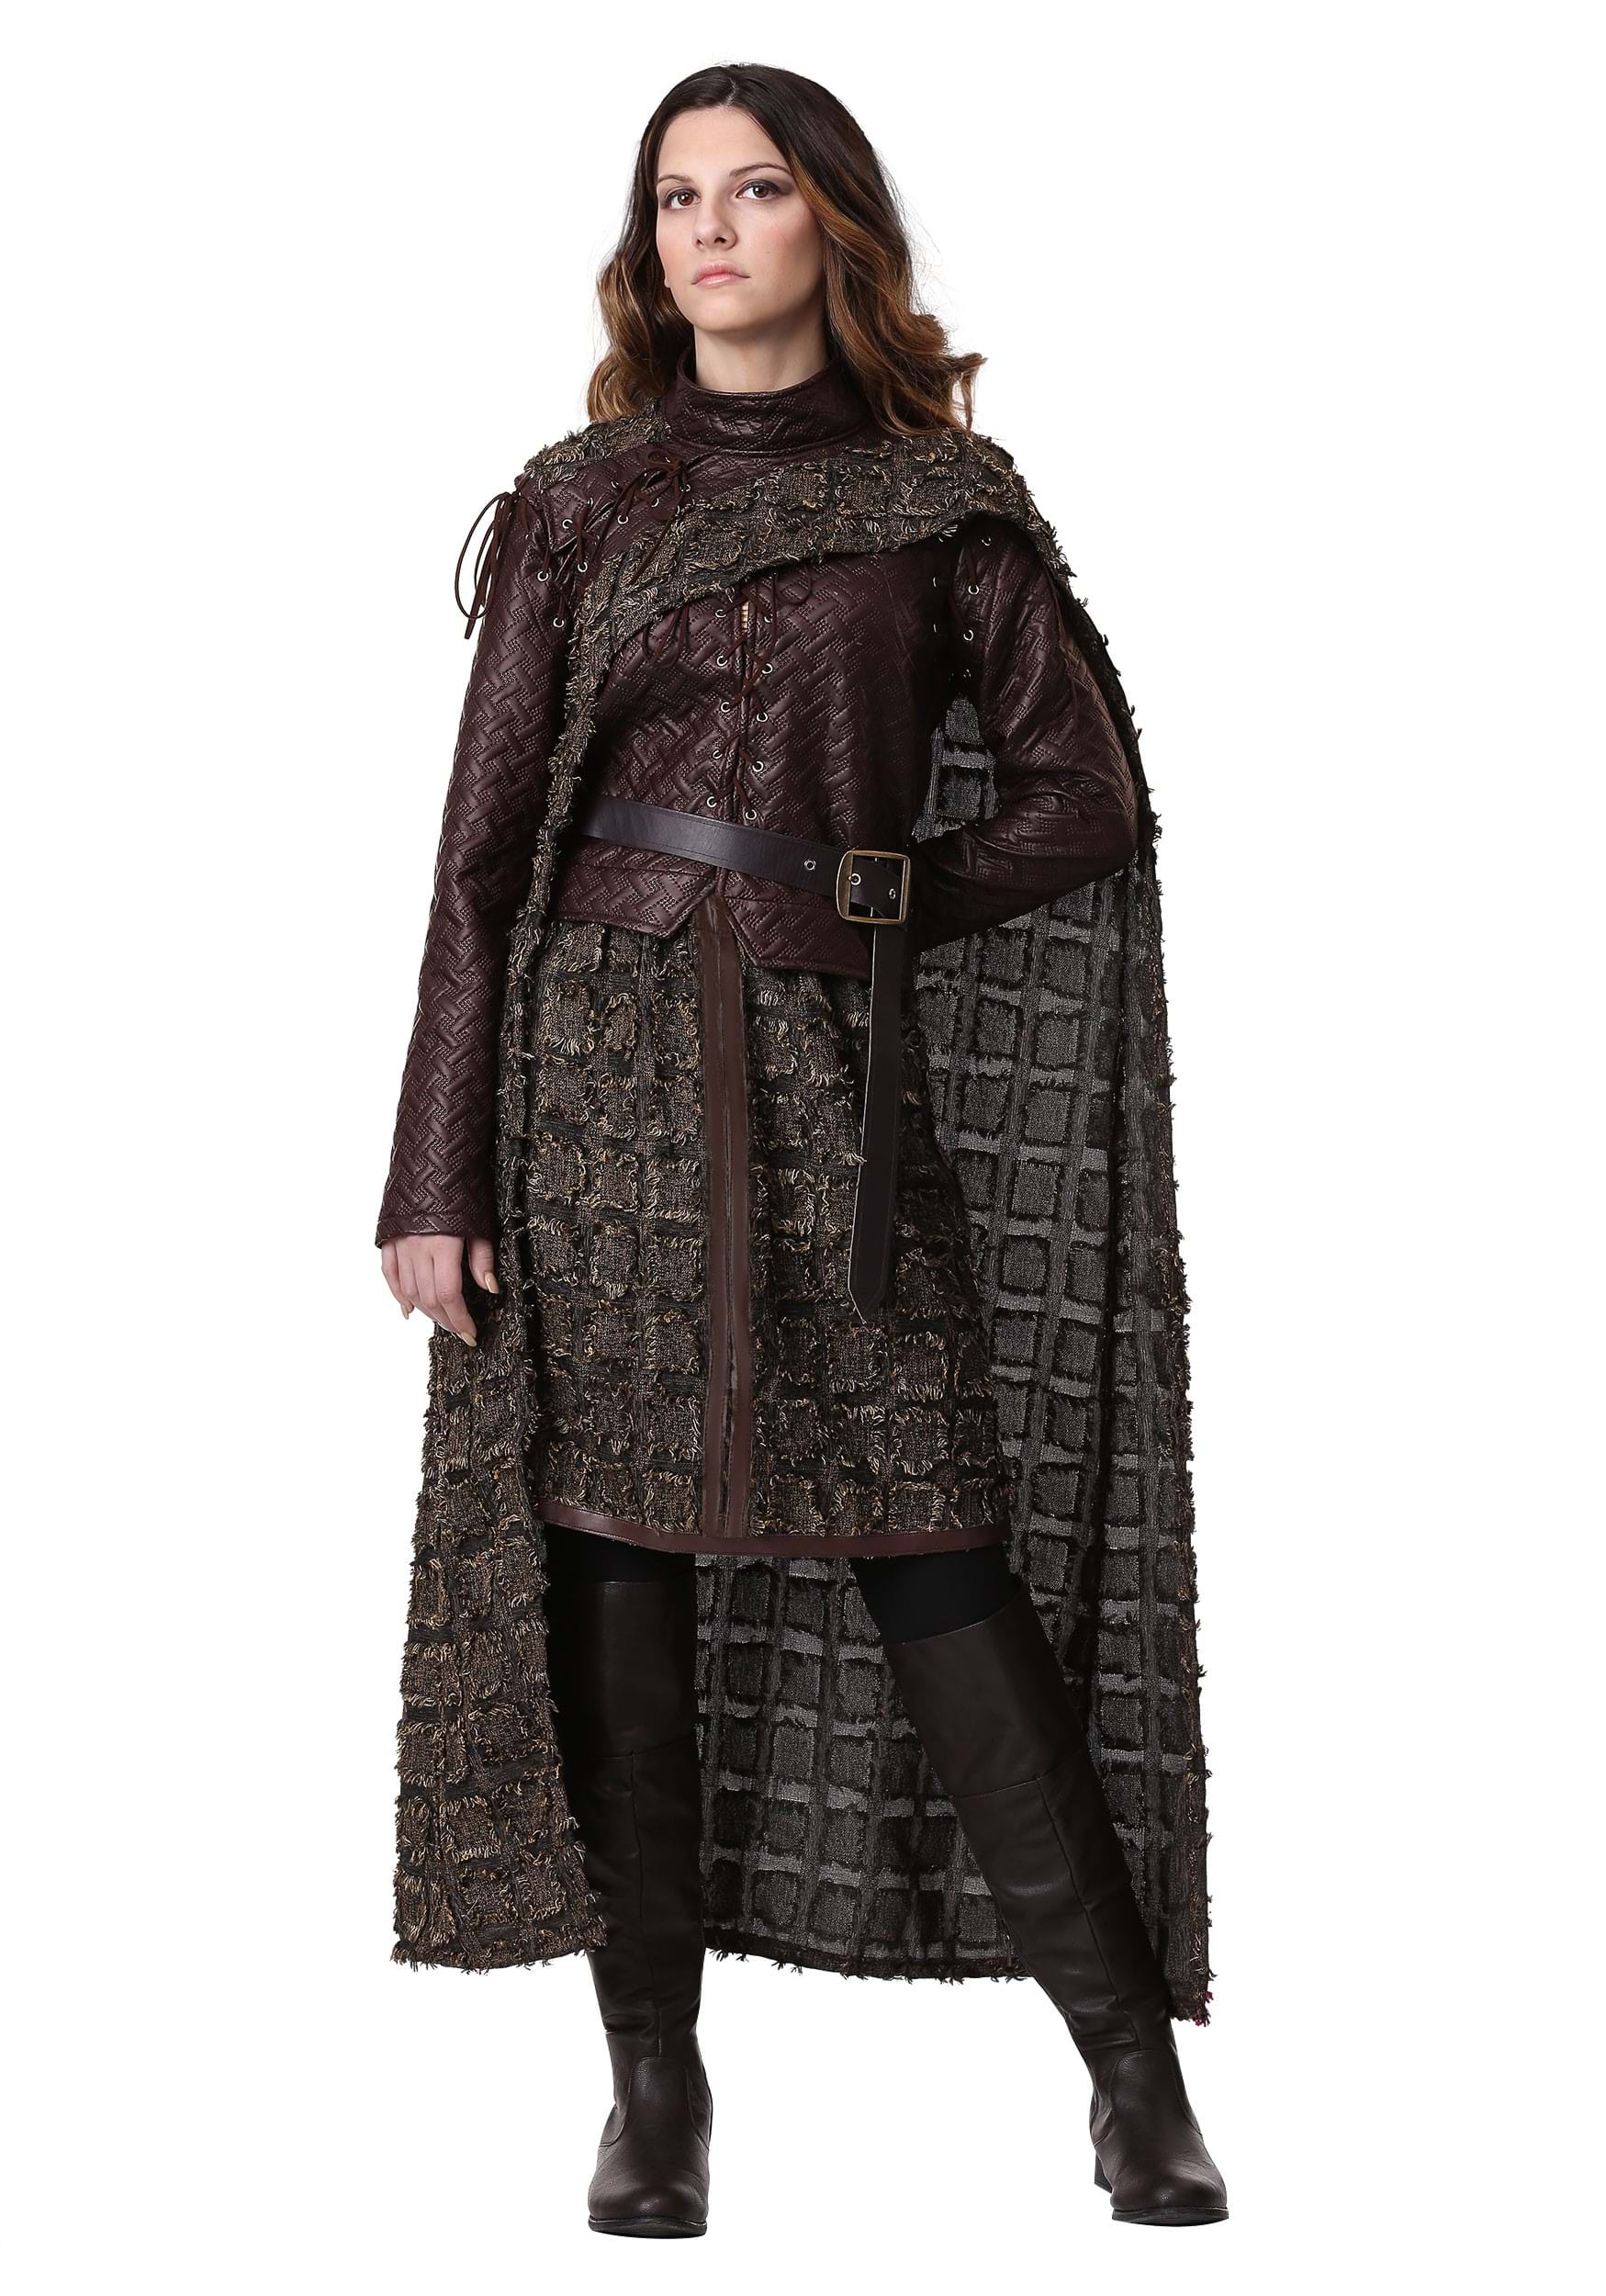 Image of Women's Winter Warrior Costume with Cape & Jacket ID FUN6363AD-XL